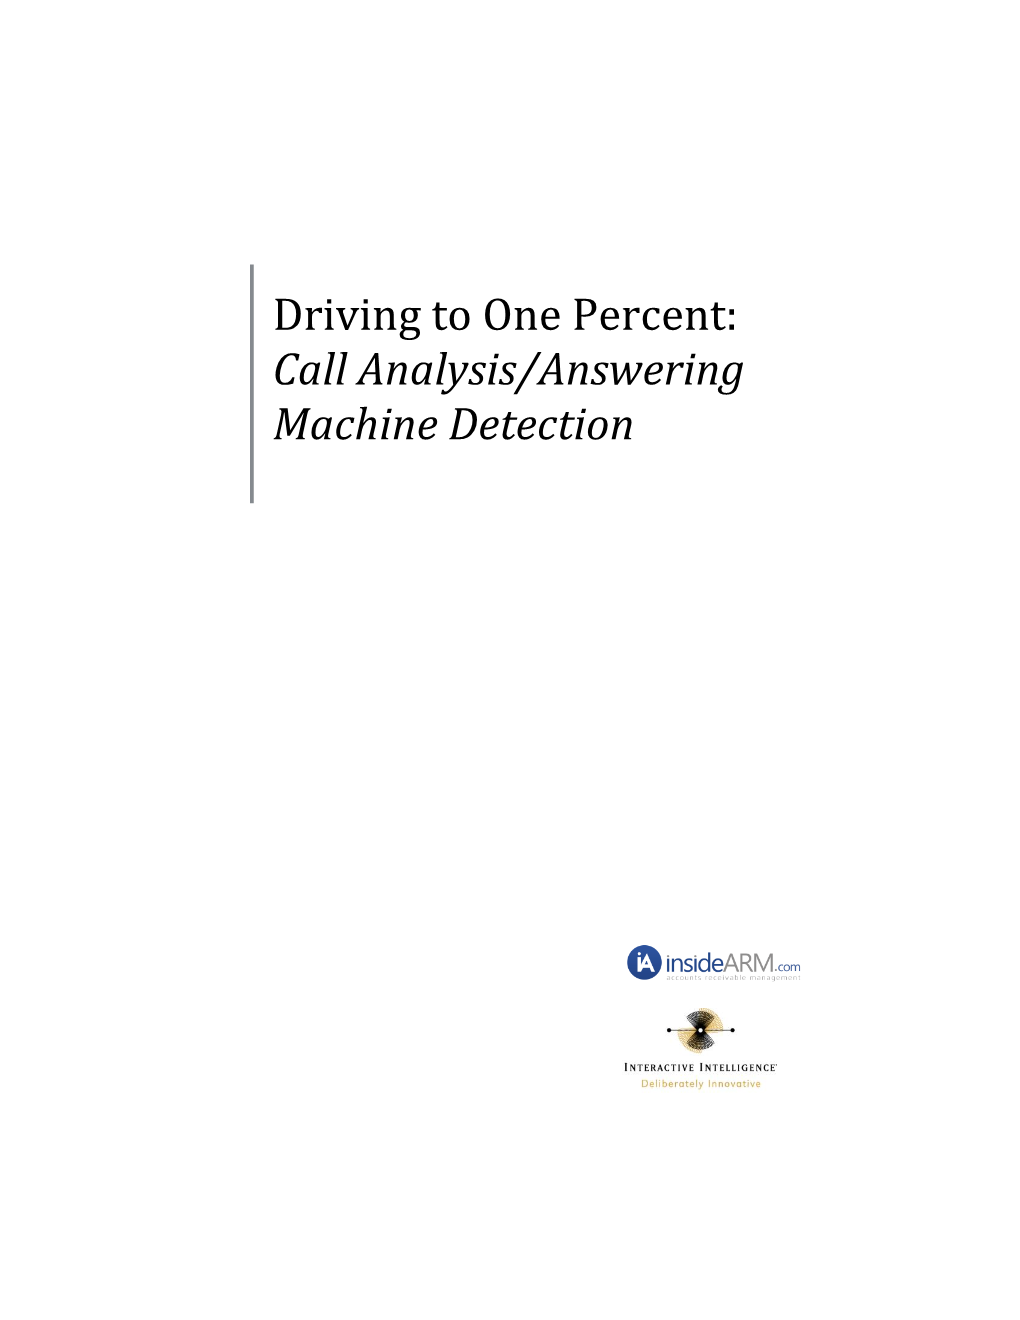 Driving to One Percent: Call Analysis/Answering Machine Detection